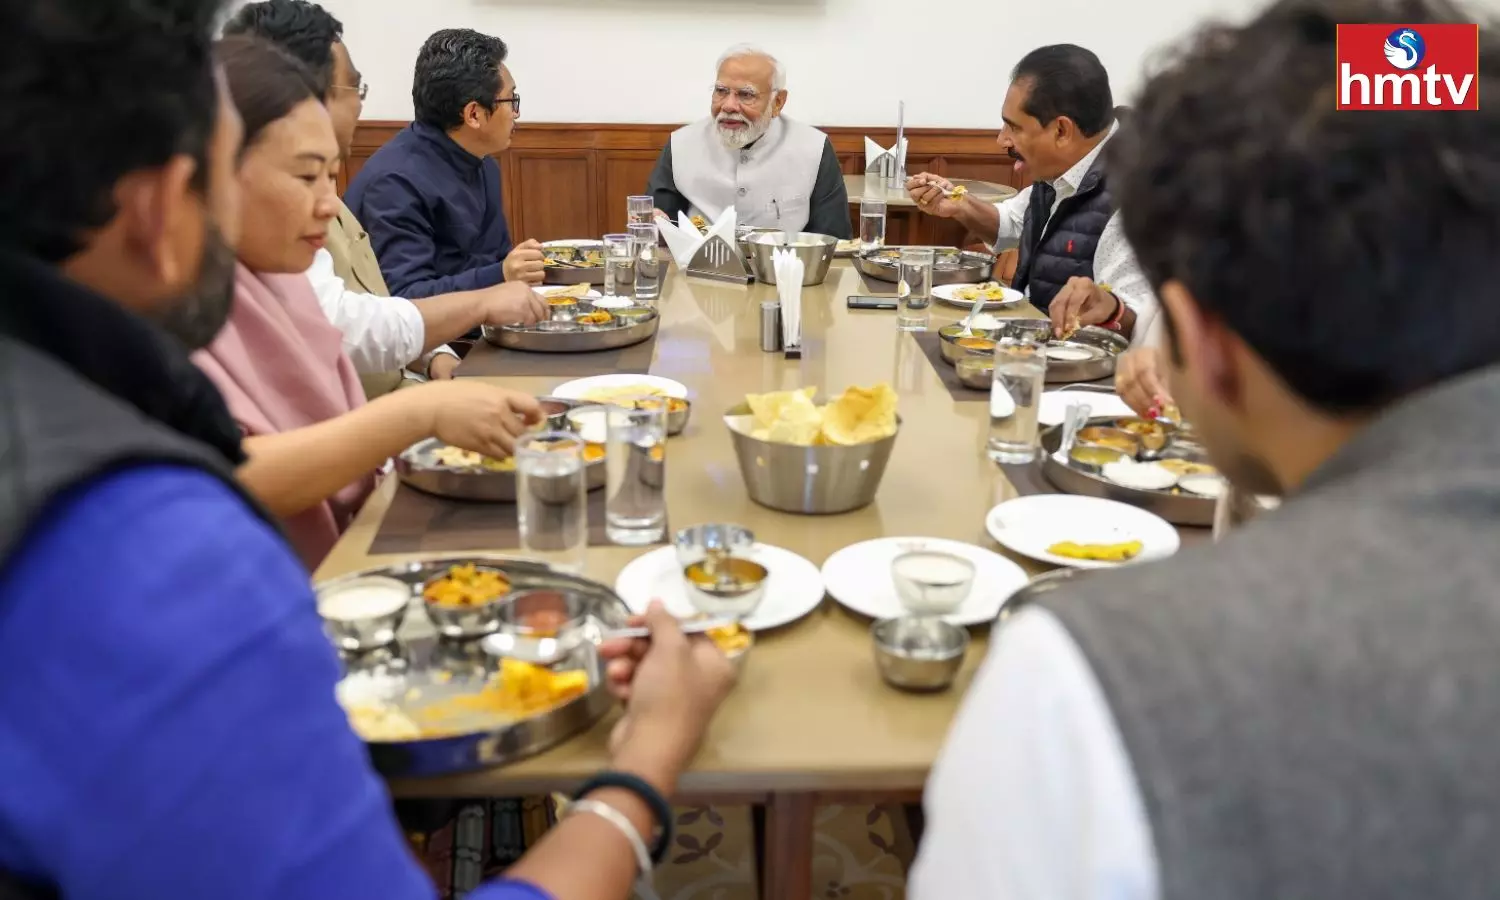 Inside Pm Modis Impromptu Lunch With Mps At Parliament Canteen